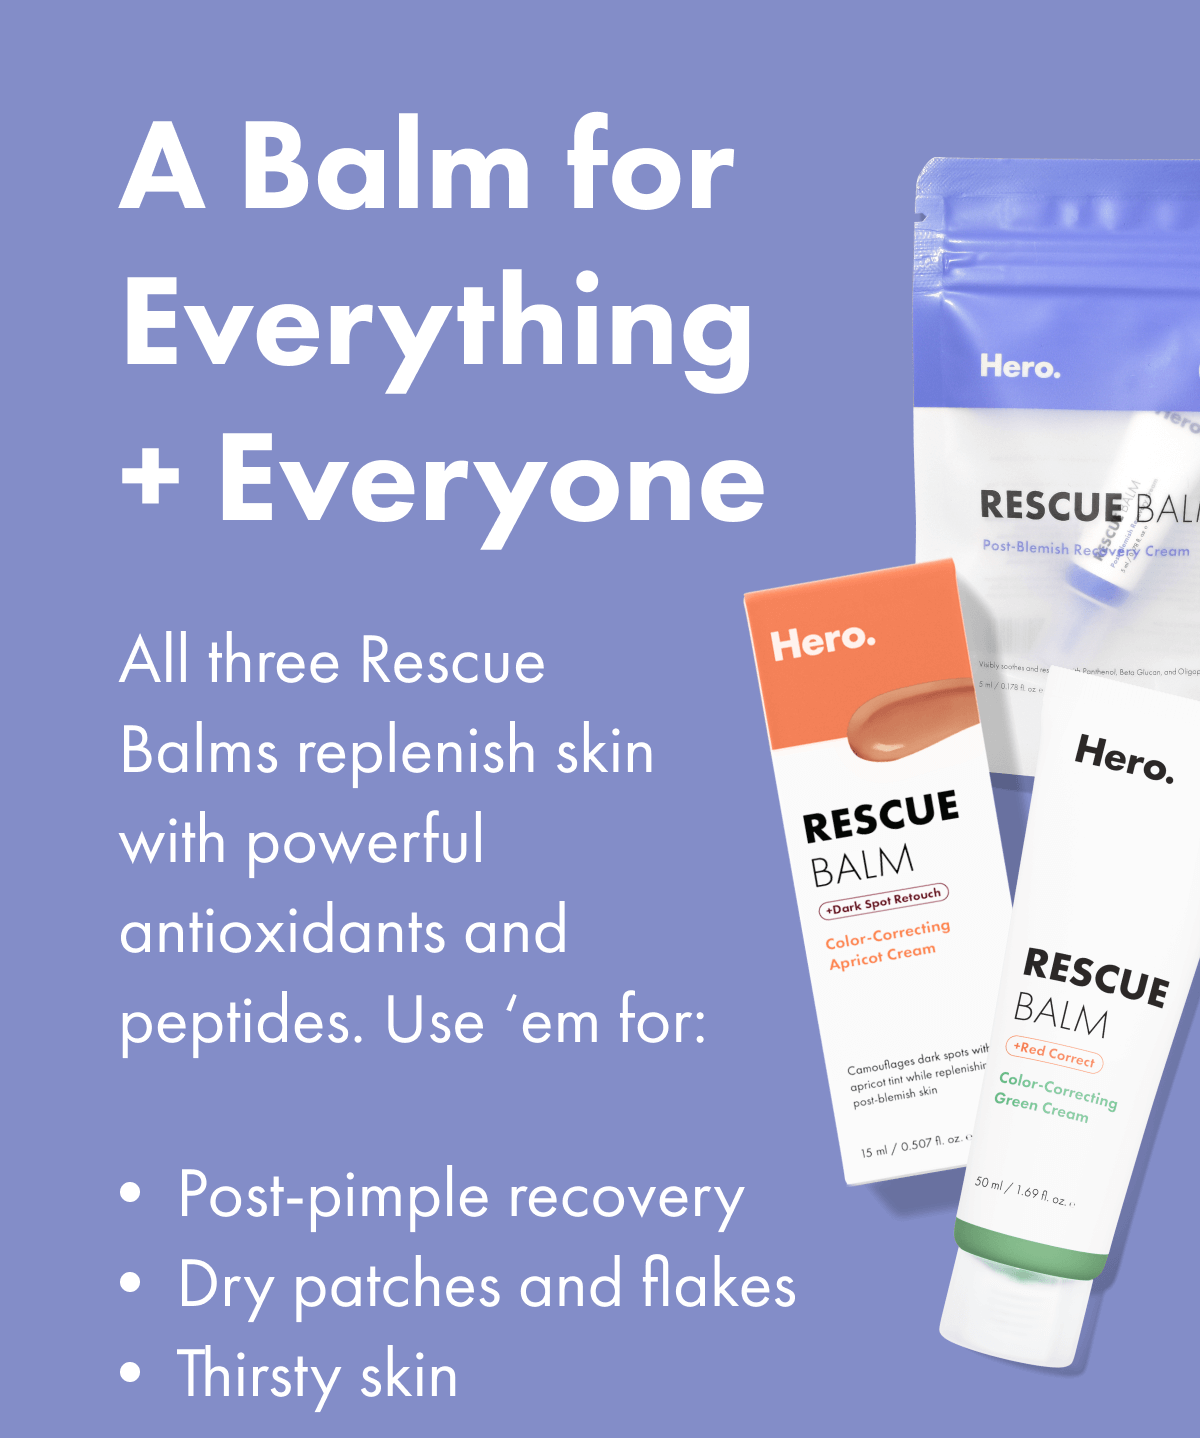 A Balm for Everything + Everyone